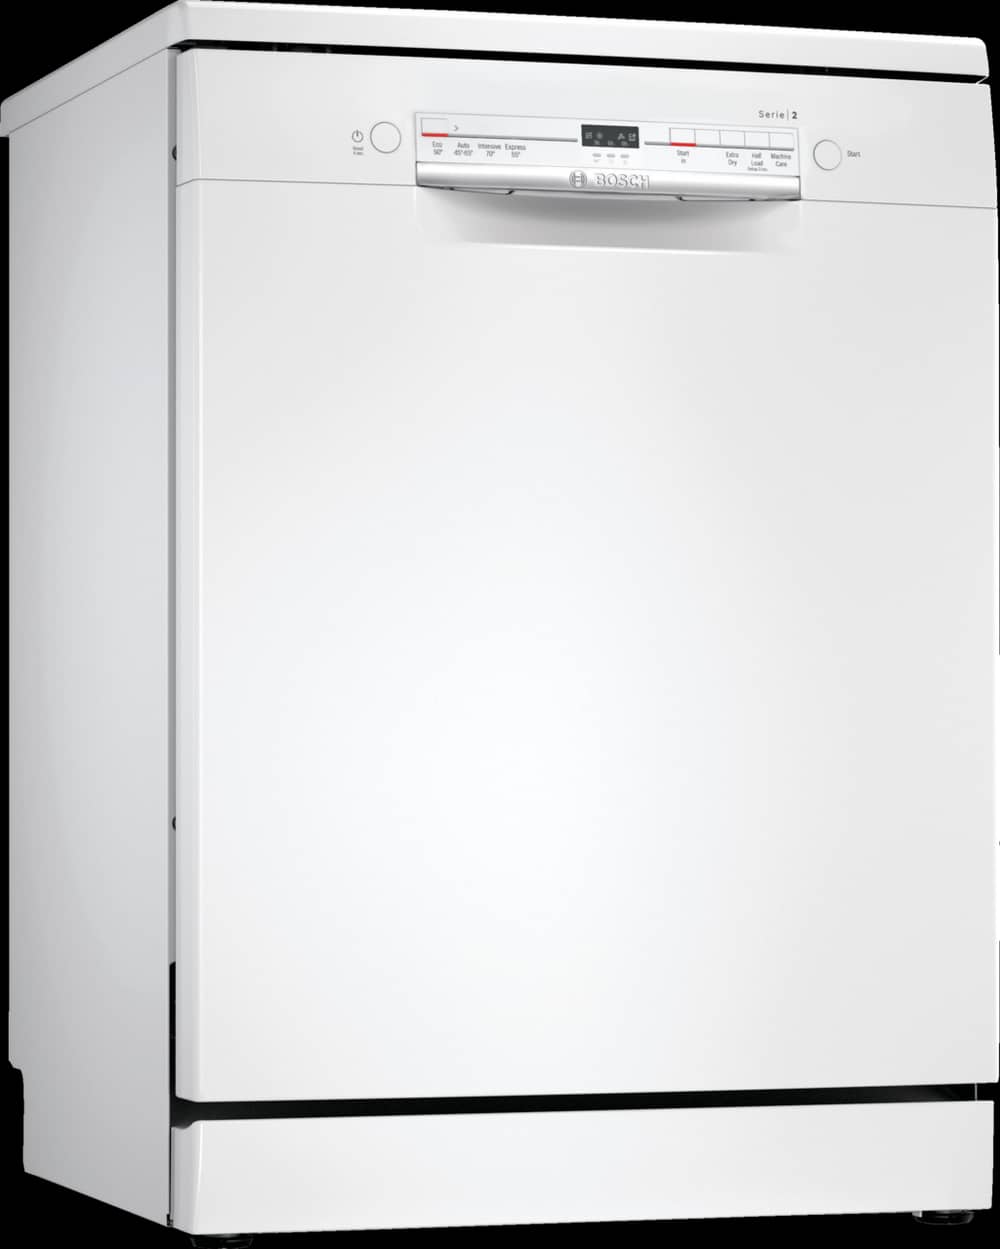 Bosch SGS2ITW08G Full Size Dishwasher - White - 12 Place Settings